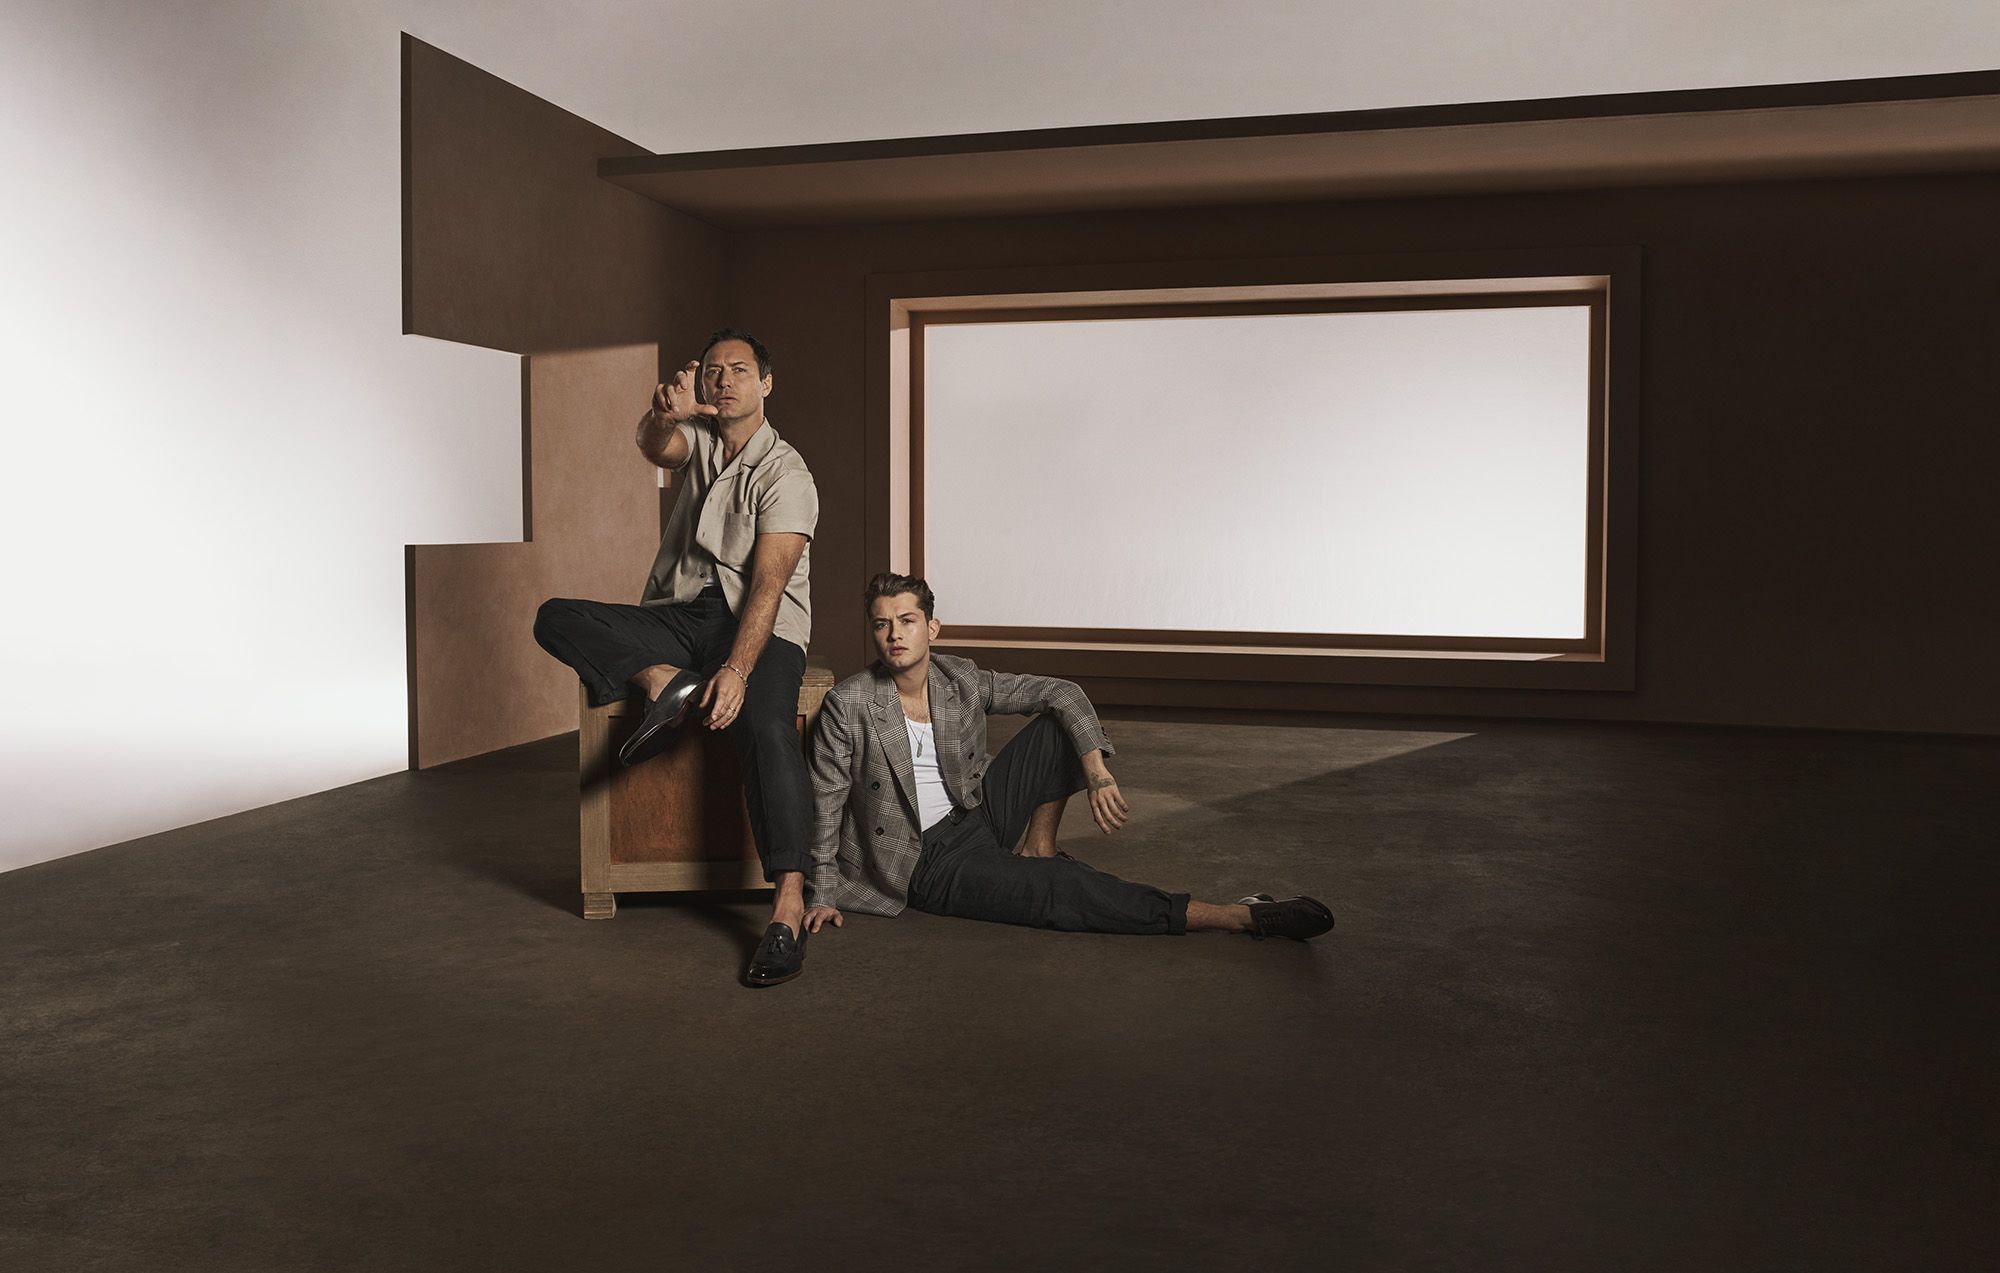 Brioni Spring/Summer 2022 Featuring Jude Law and Raff Law